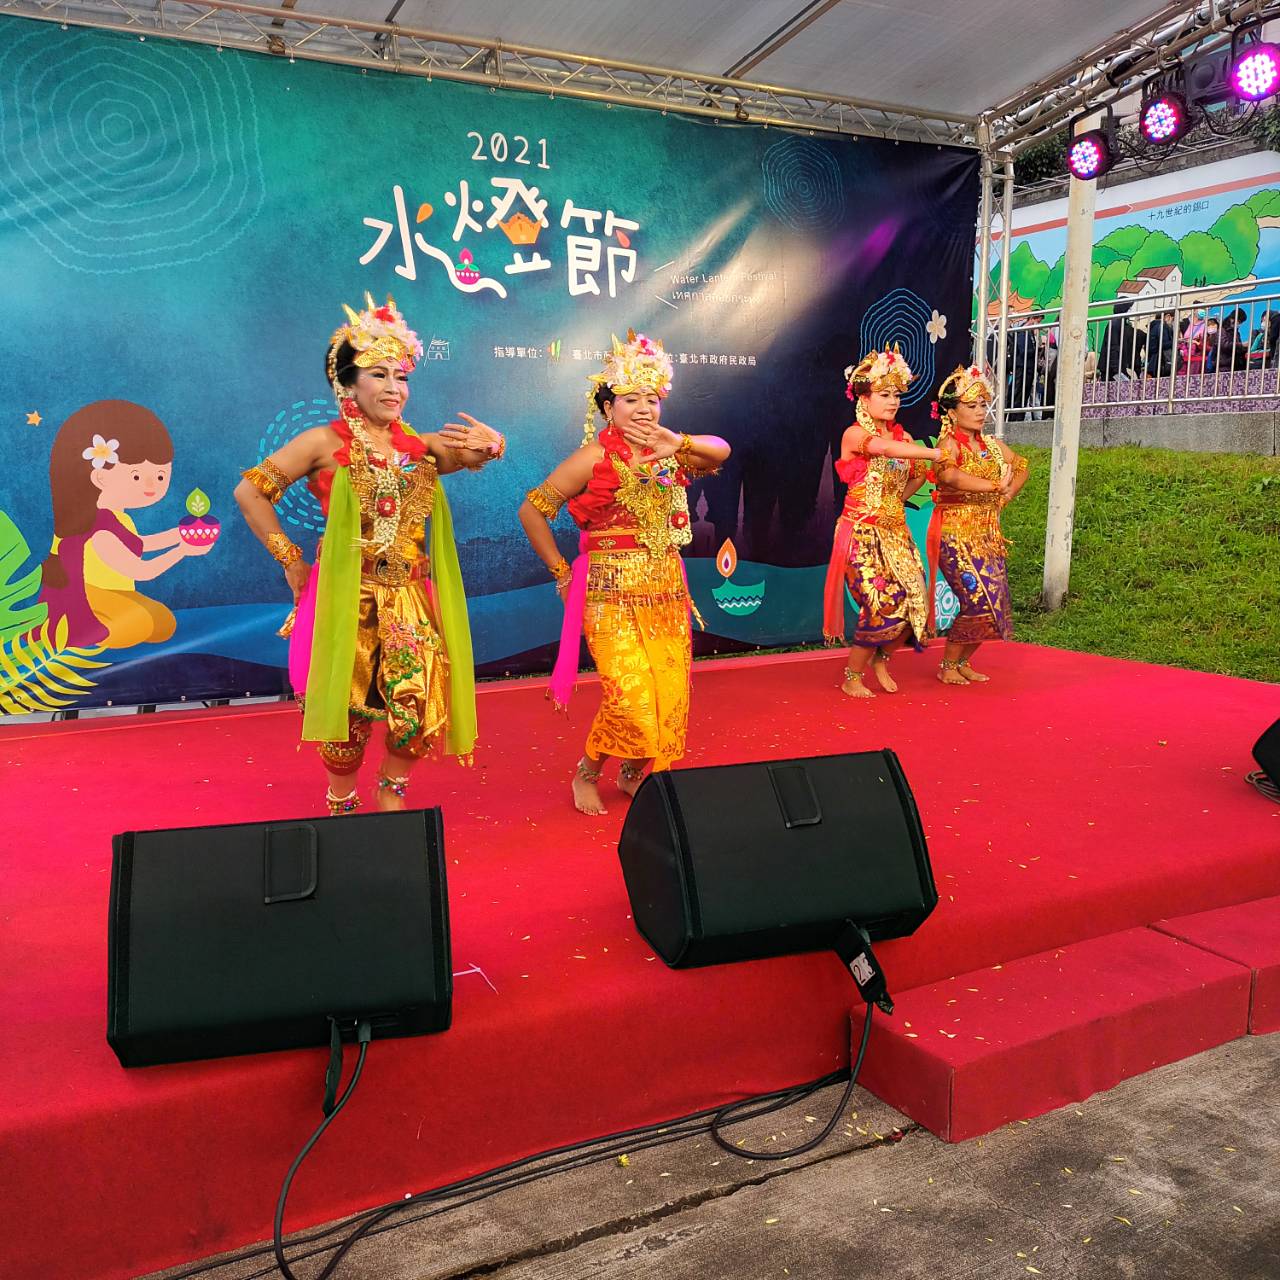 Performing at the Water Lantern Festival